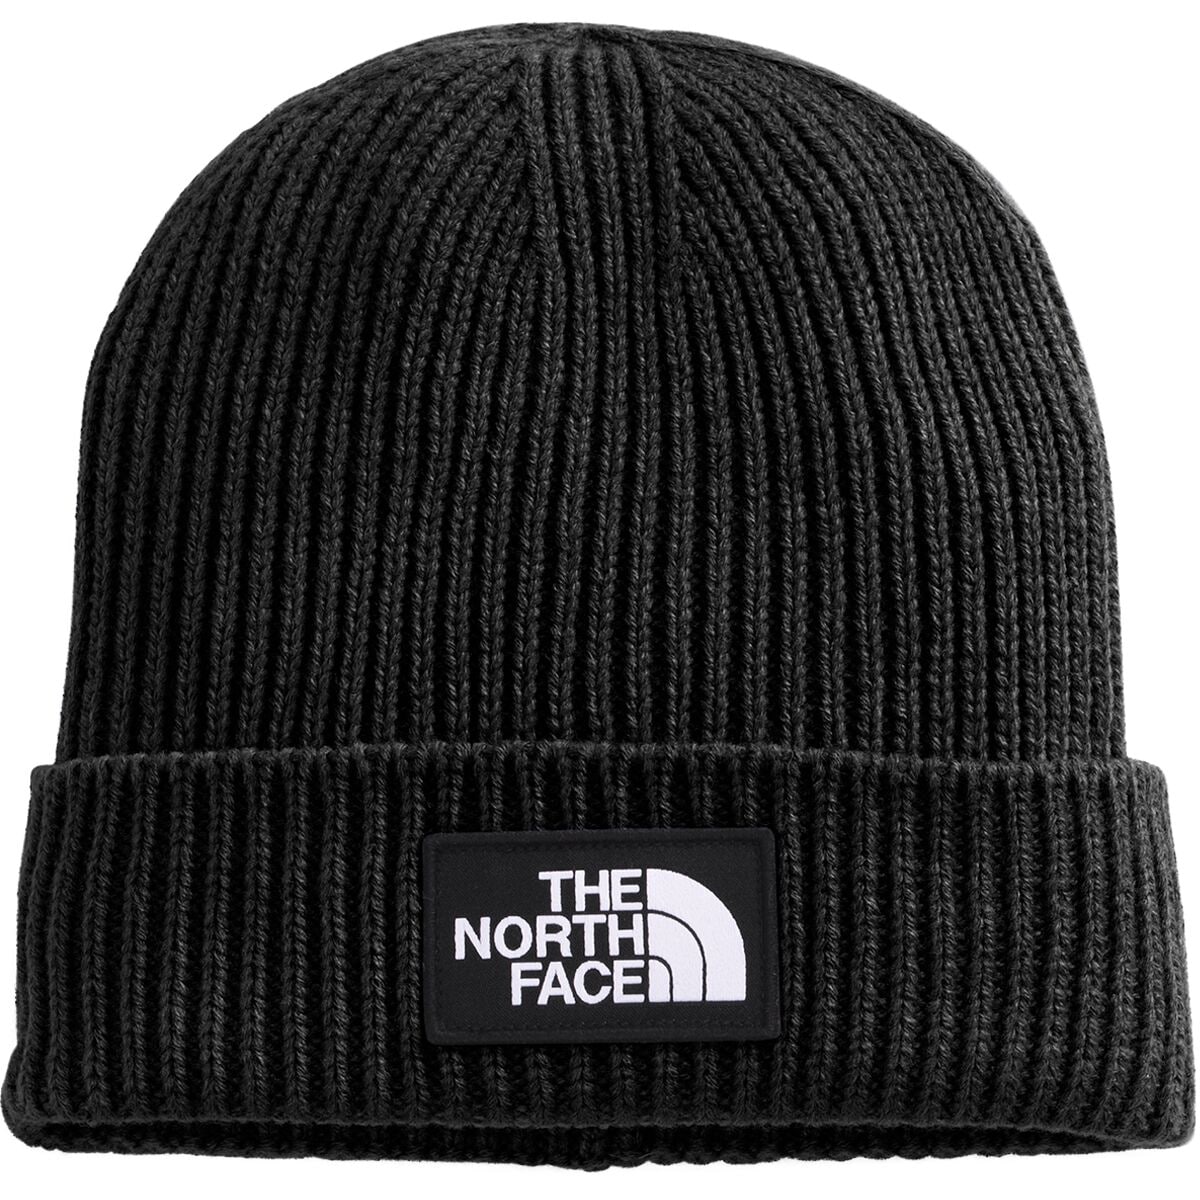 The North Face Beanie Cream Colored With Black Writing